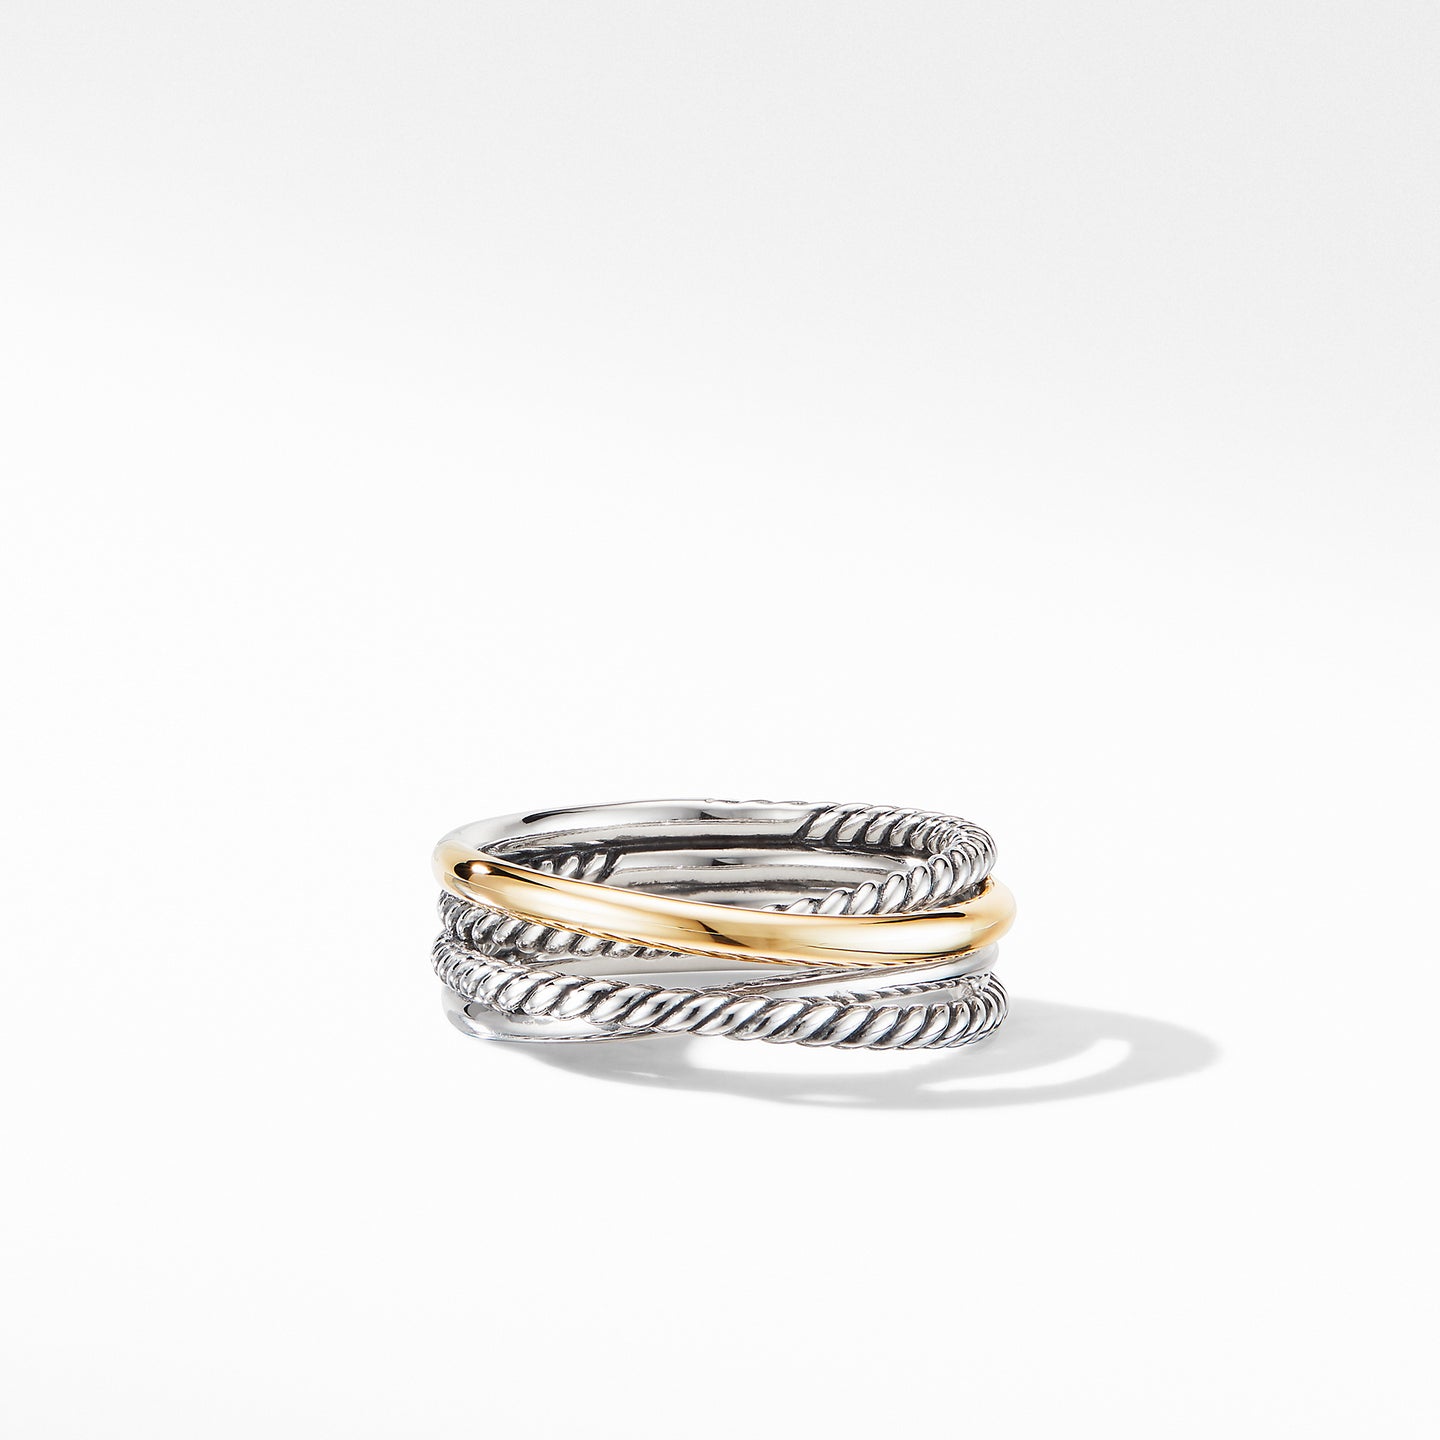 David Yurman The Crossover® Collection Ring in Silver and 18-Karat Yellow Gold